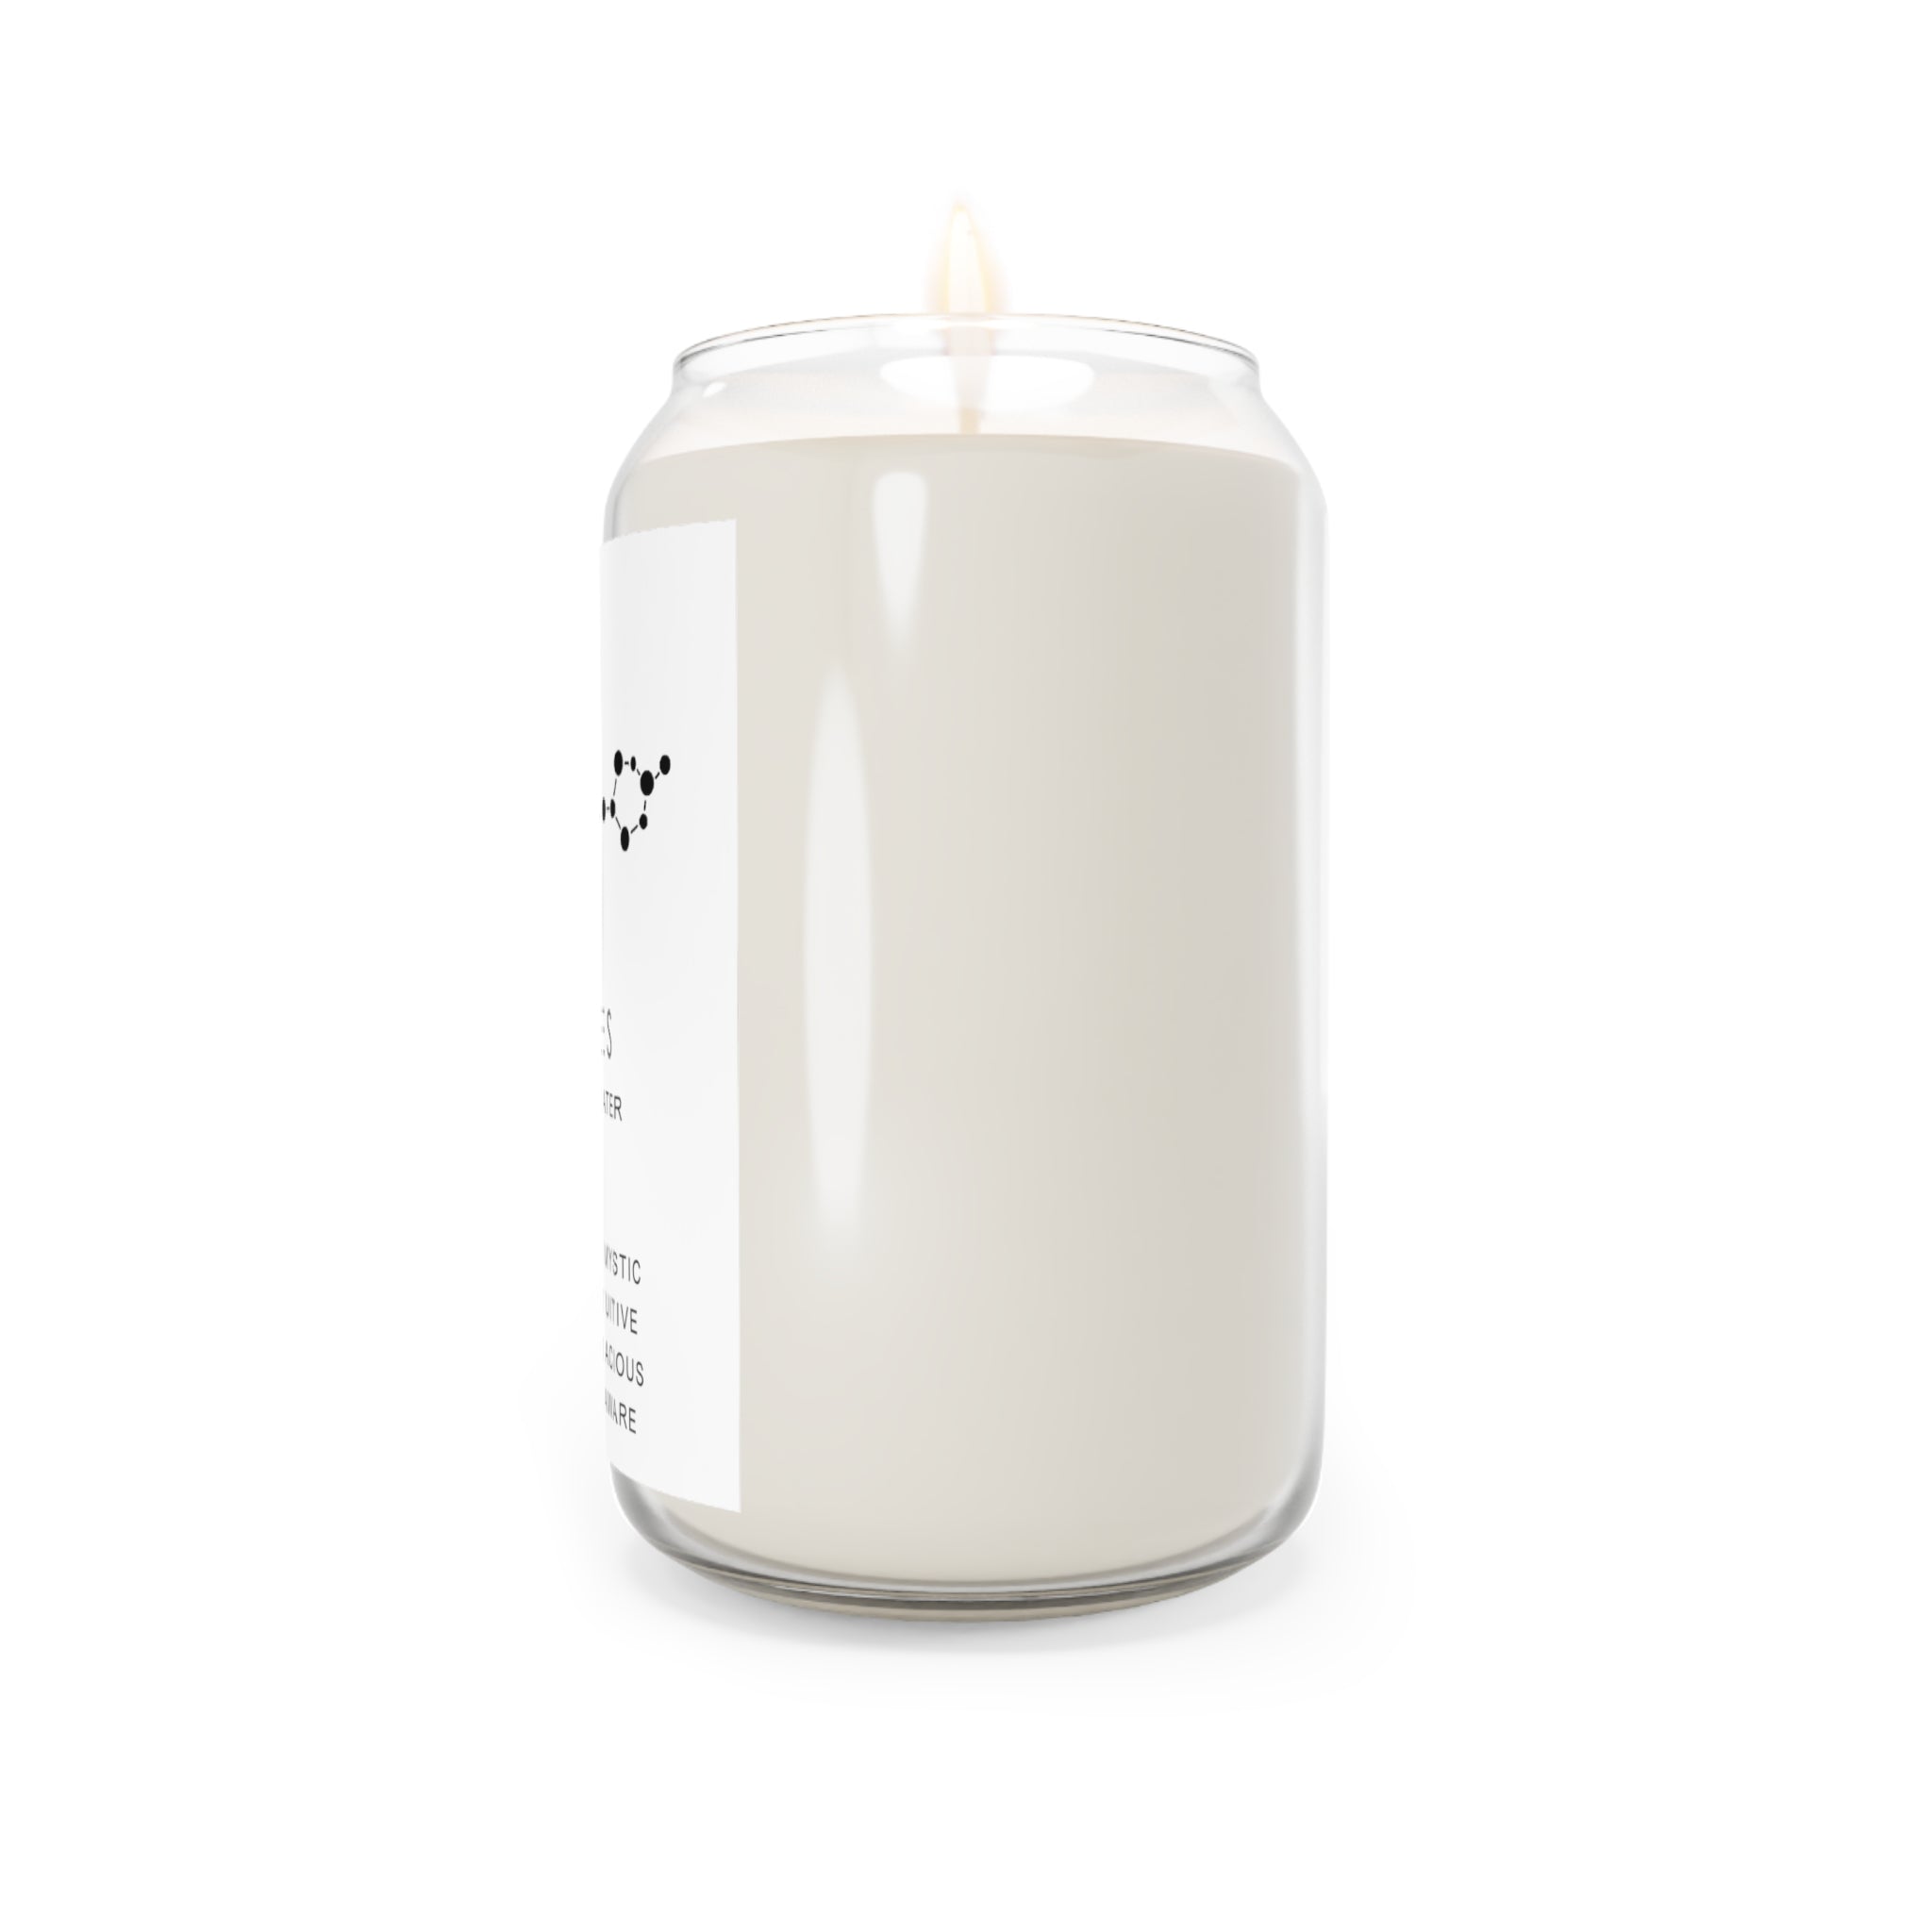 Pisces Zodiac Luxe Candle